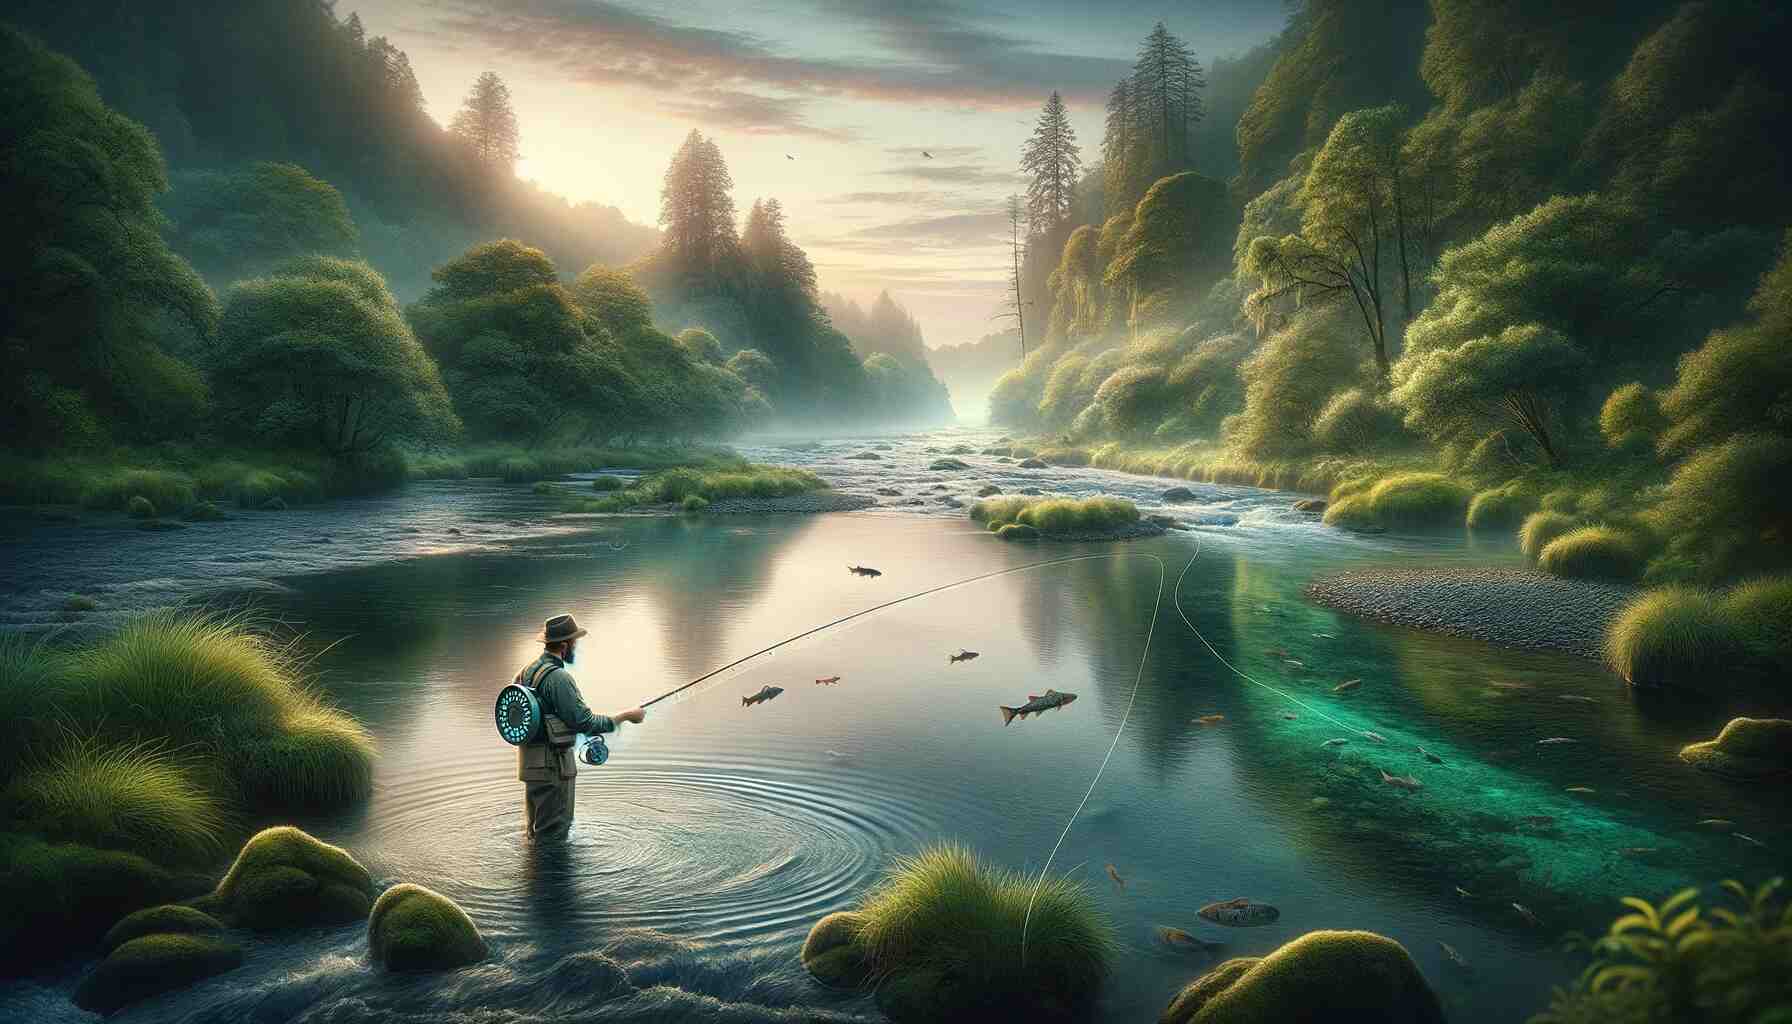 Here is the featured image for "Do You Need Weights For Fly Fishing? Matching Conditions." It depicts a serene river landscape with a fly fisherman, focusing on the technique and the natural setting.